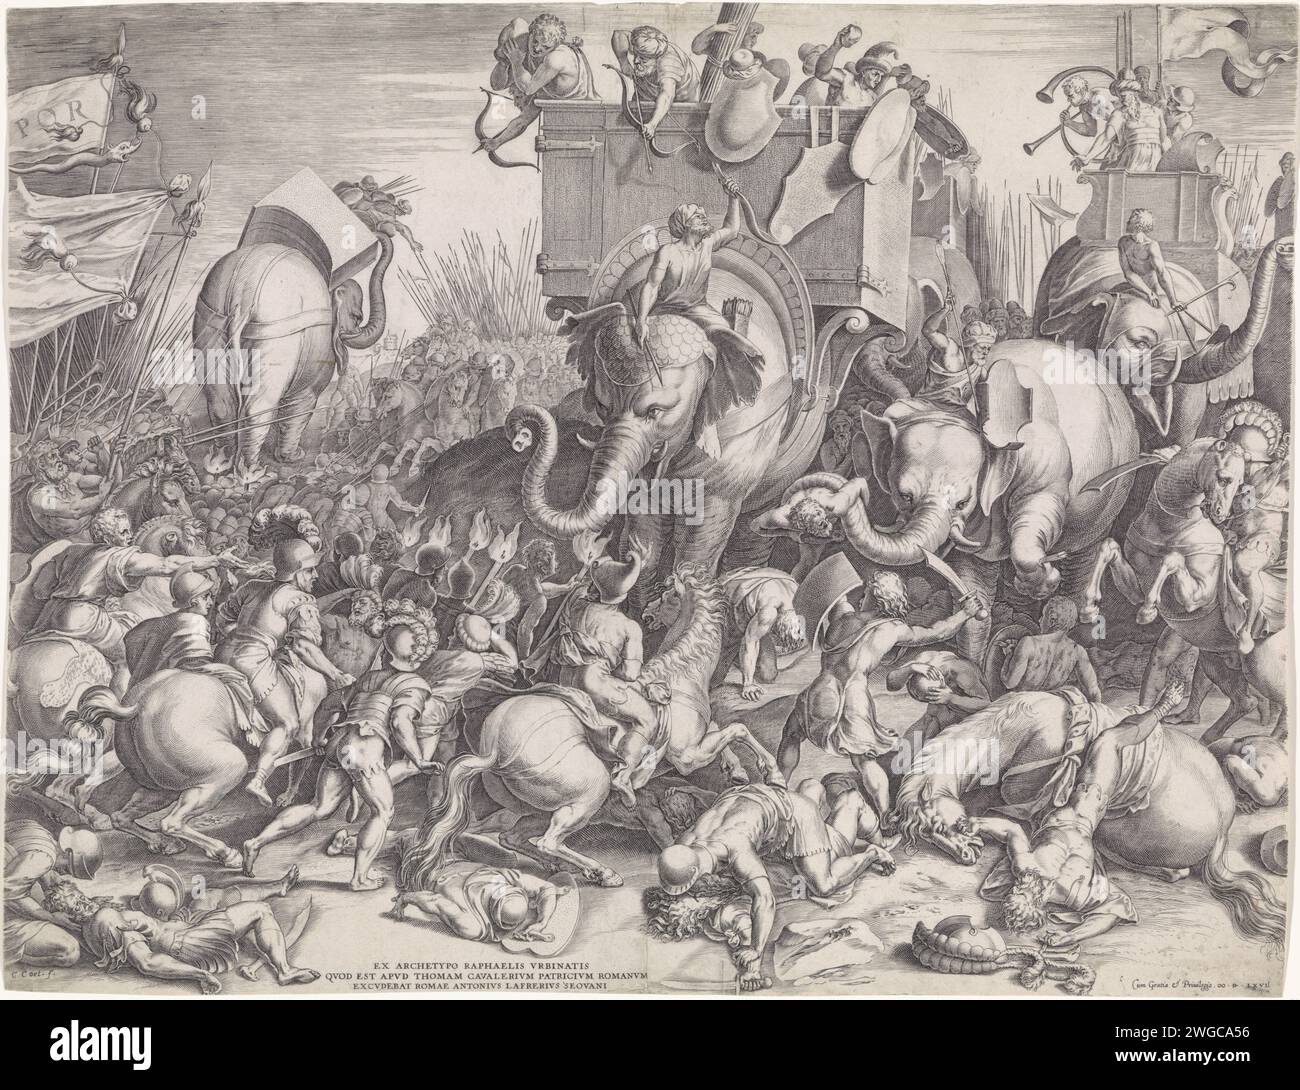 Battle of Zama between Scipio and Hannibal, Cornelis Cort, After Giulio Romano, After Rafaël, 1567 print Battle between Rome and Carthage, led by Scipio and Hannibal. The Carthagen army runs on elephants, the Romans are on foot and on horseback, but can eventually beat Carthage. Rome paper engraving Hannibal crosses the Alps with his army and his elephants. (story of) P. Cornelius Scipio Africanus Major. battle. trunked animals: elephant Stock Photo